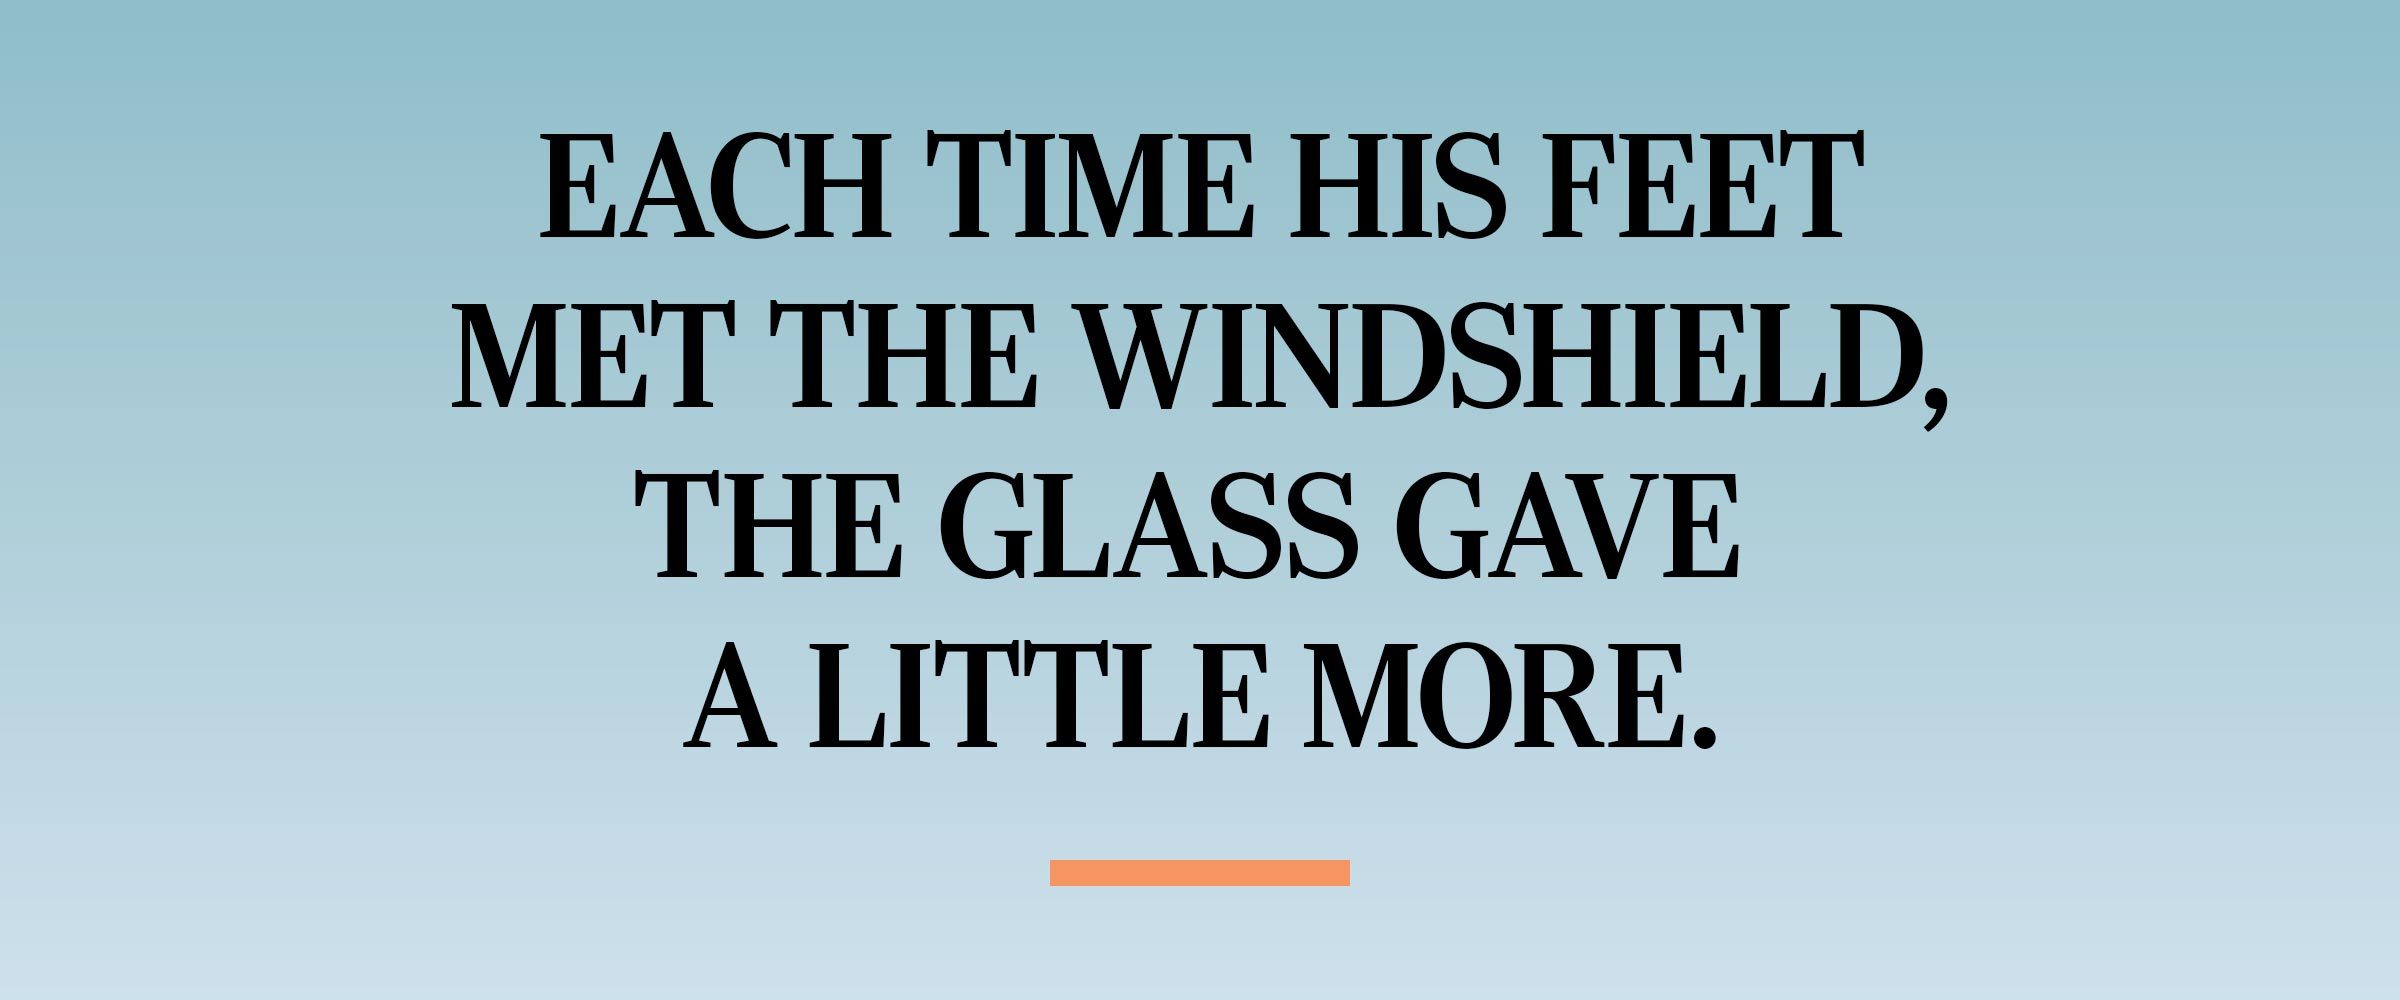 text: Each time his feet met the windshield, the glass gave a little more.